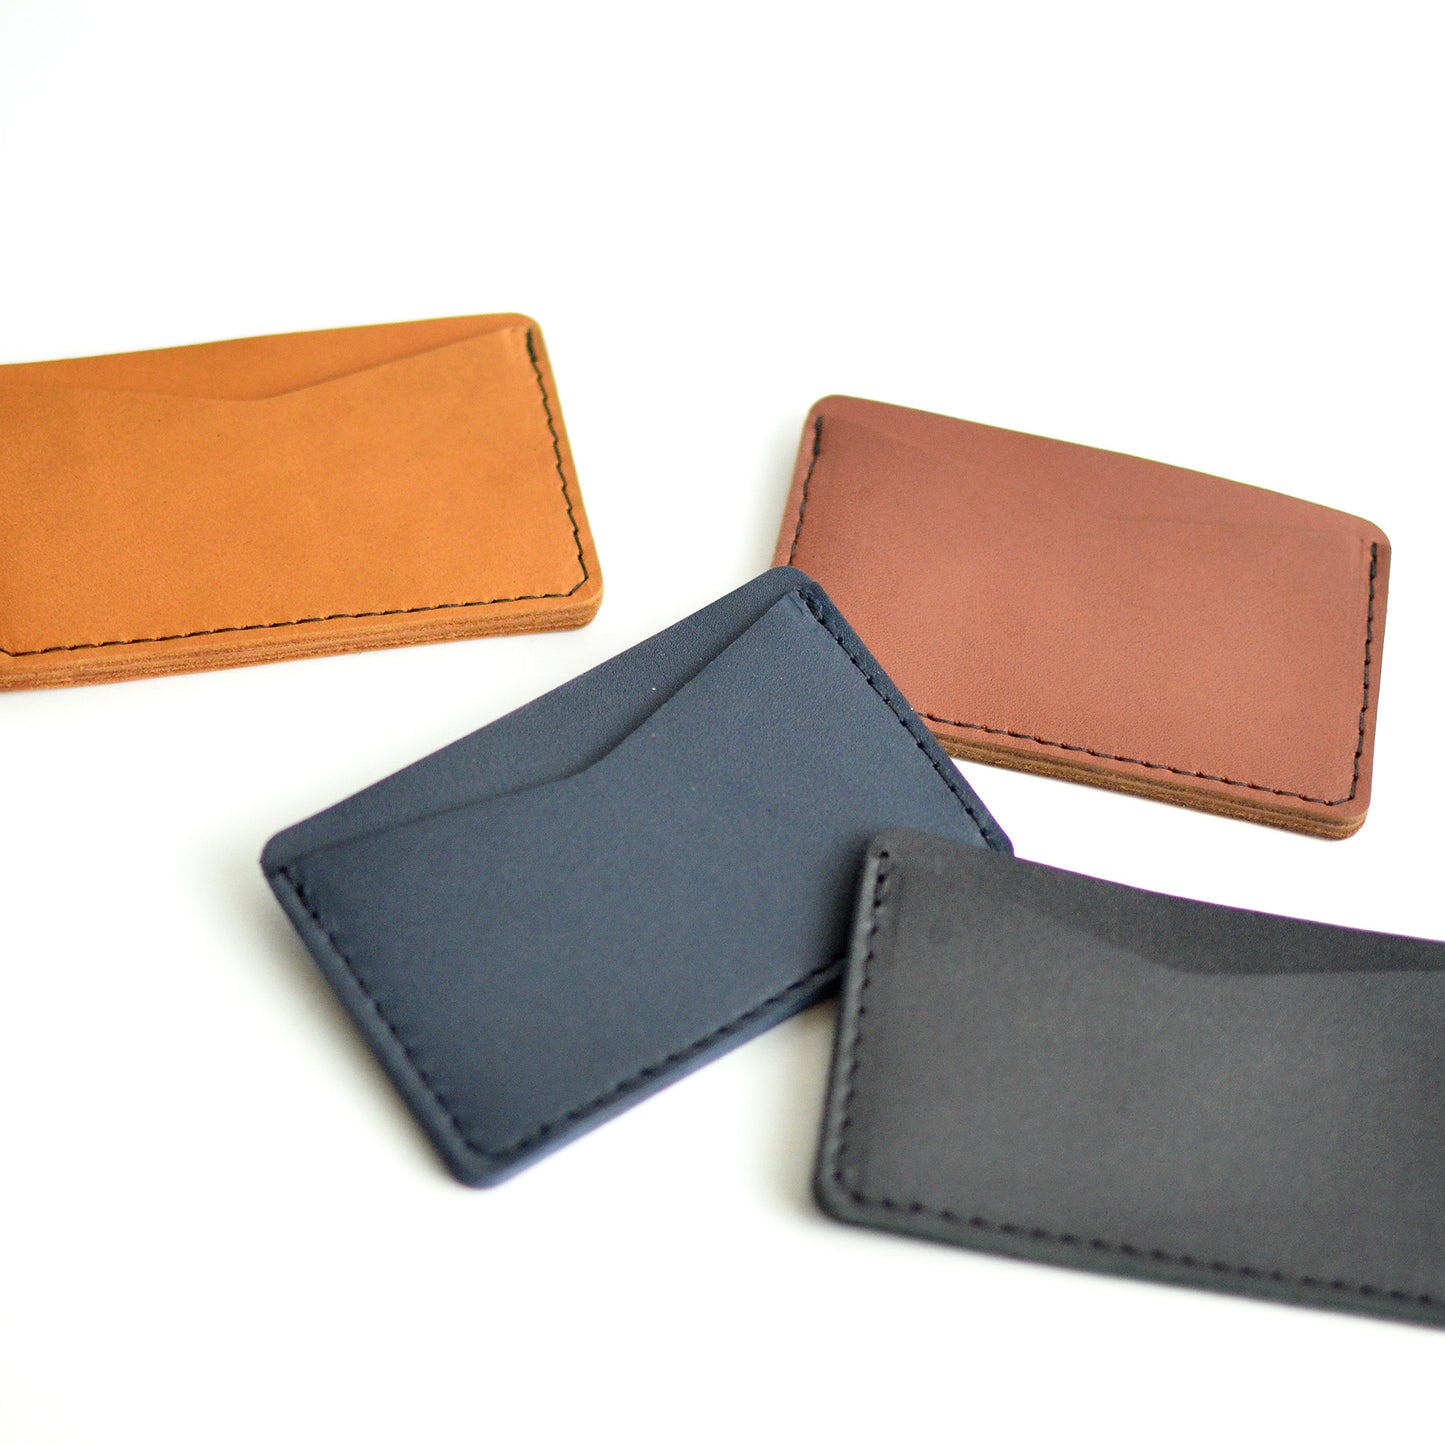 Double Sided Card Holder - Navy Blue Leather